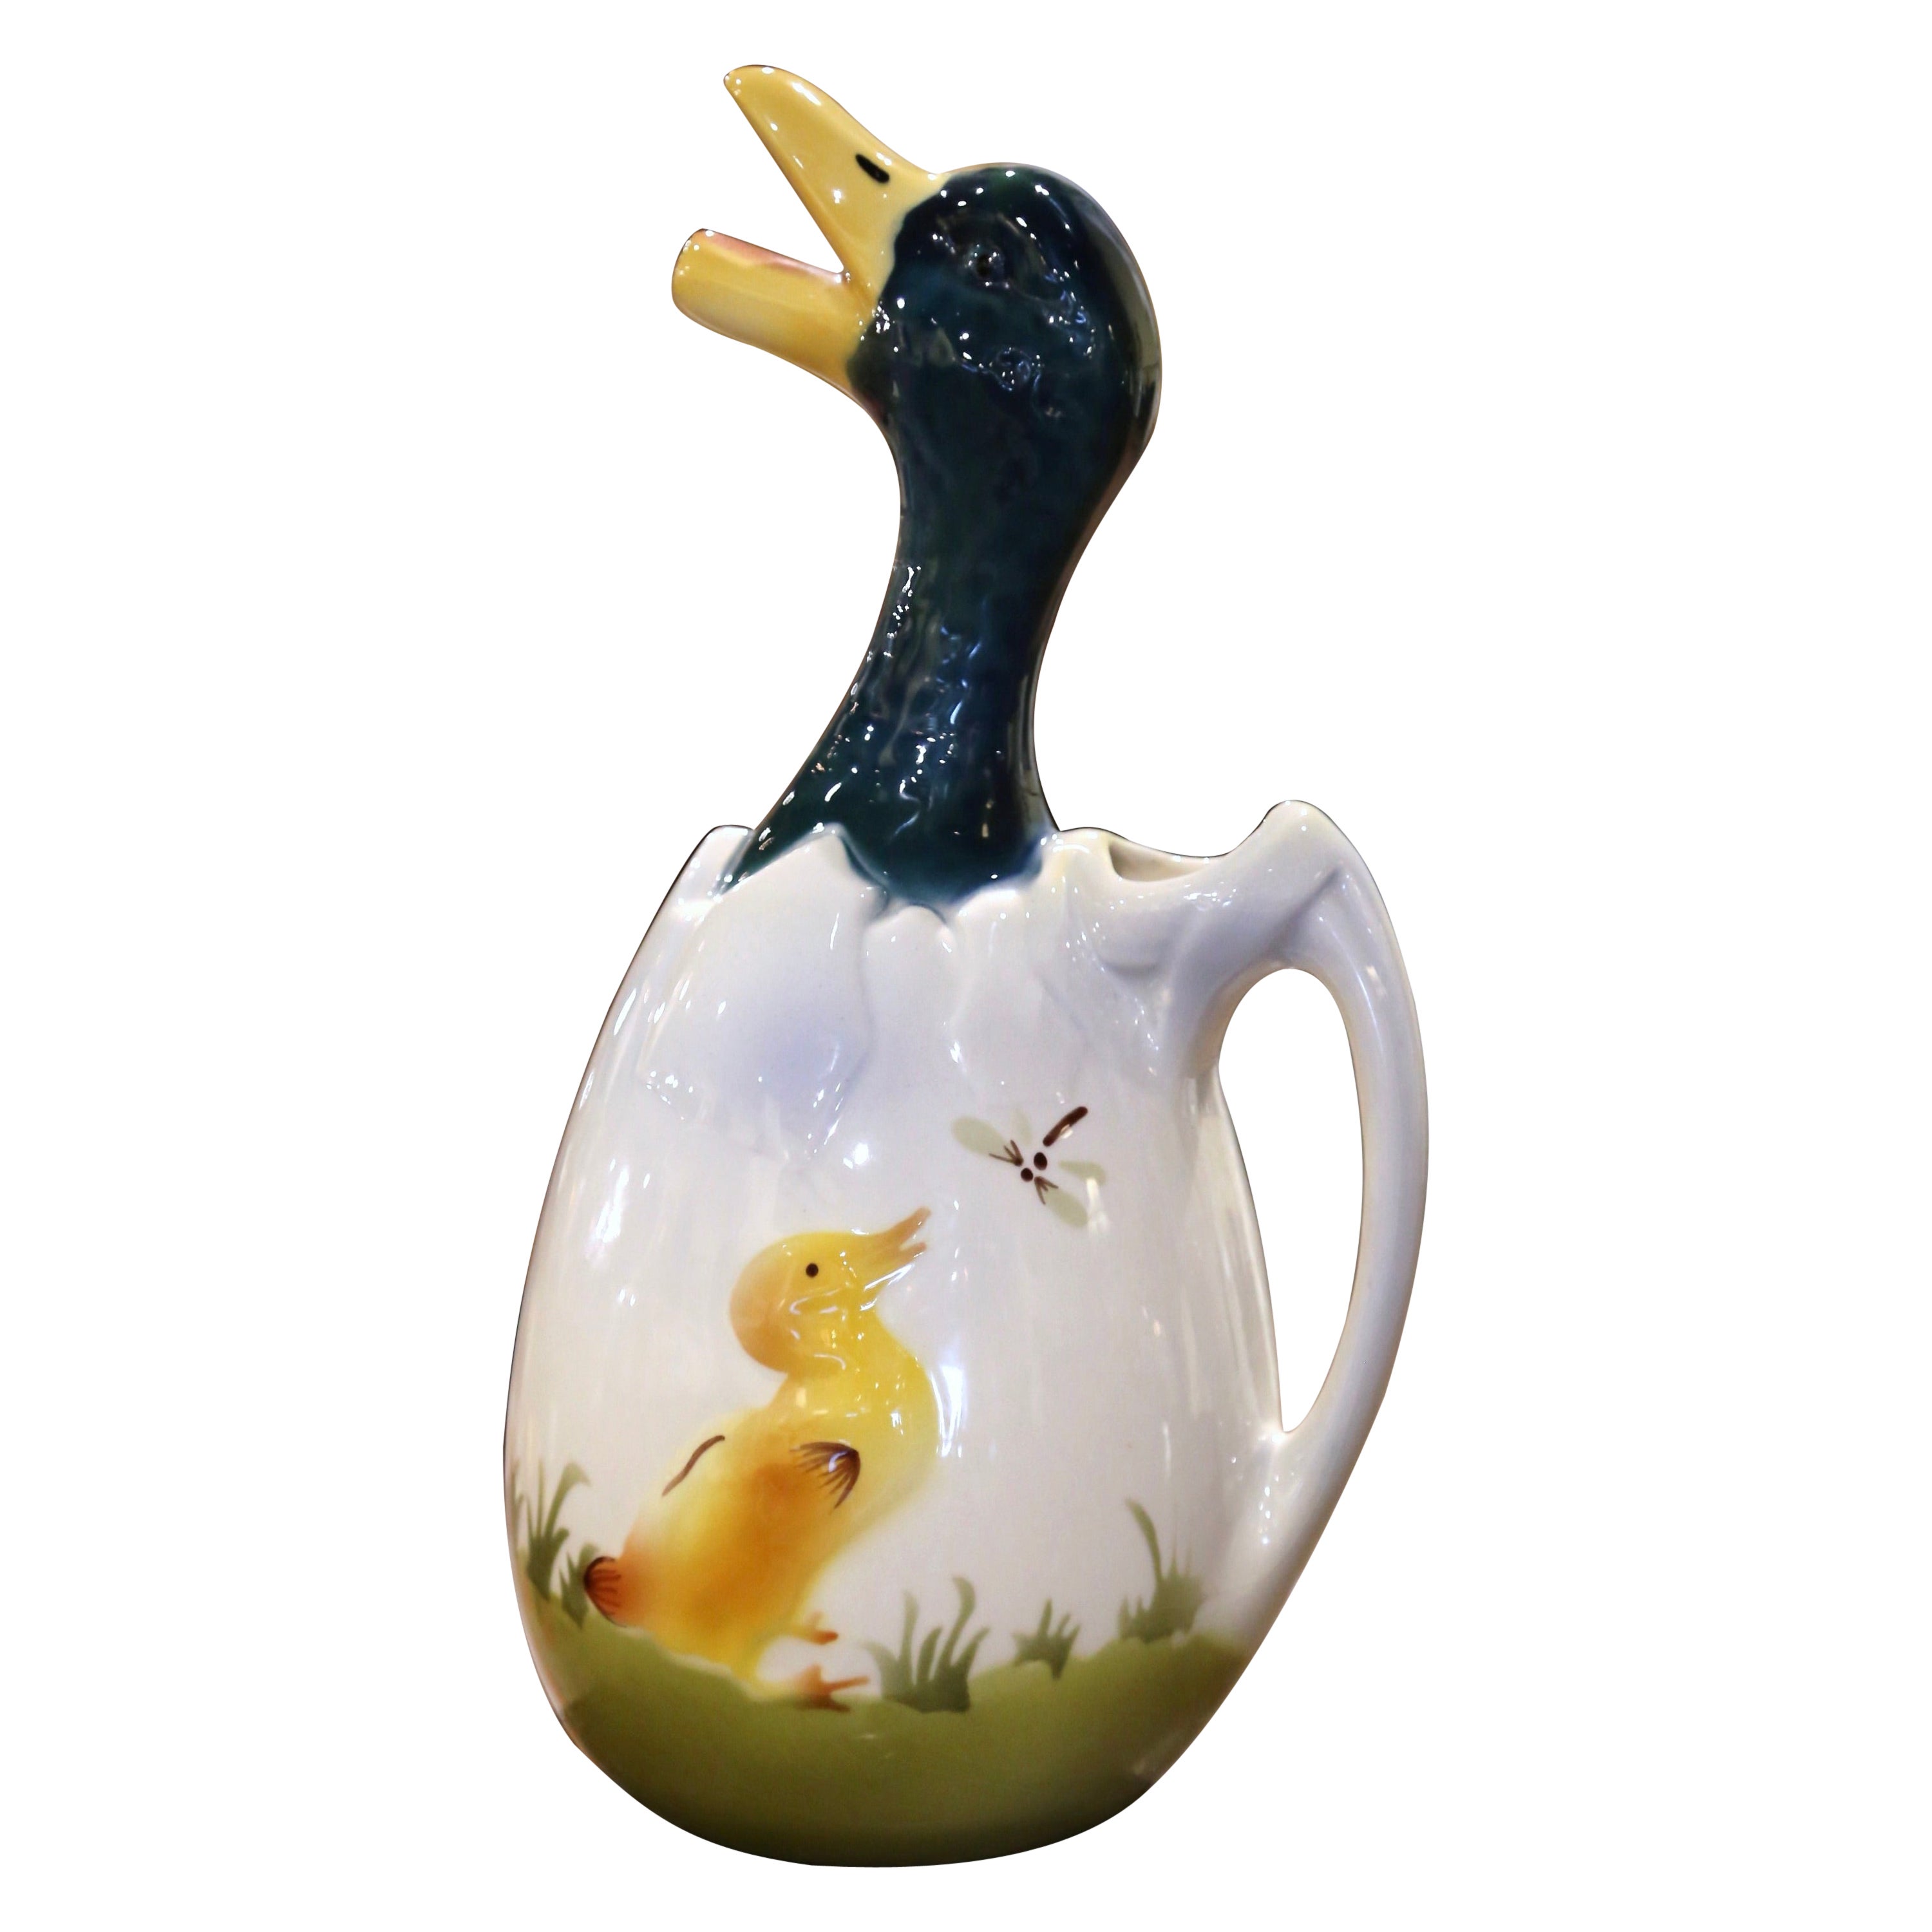 19th Century French Saint Clement Barbotine Faience Olive Oil Duck Pitcher